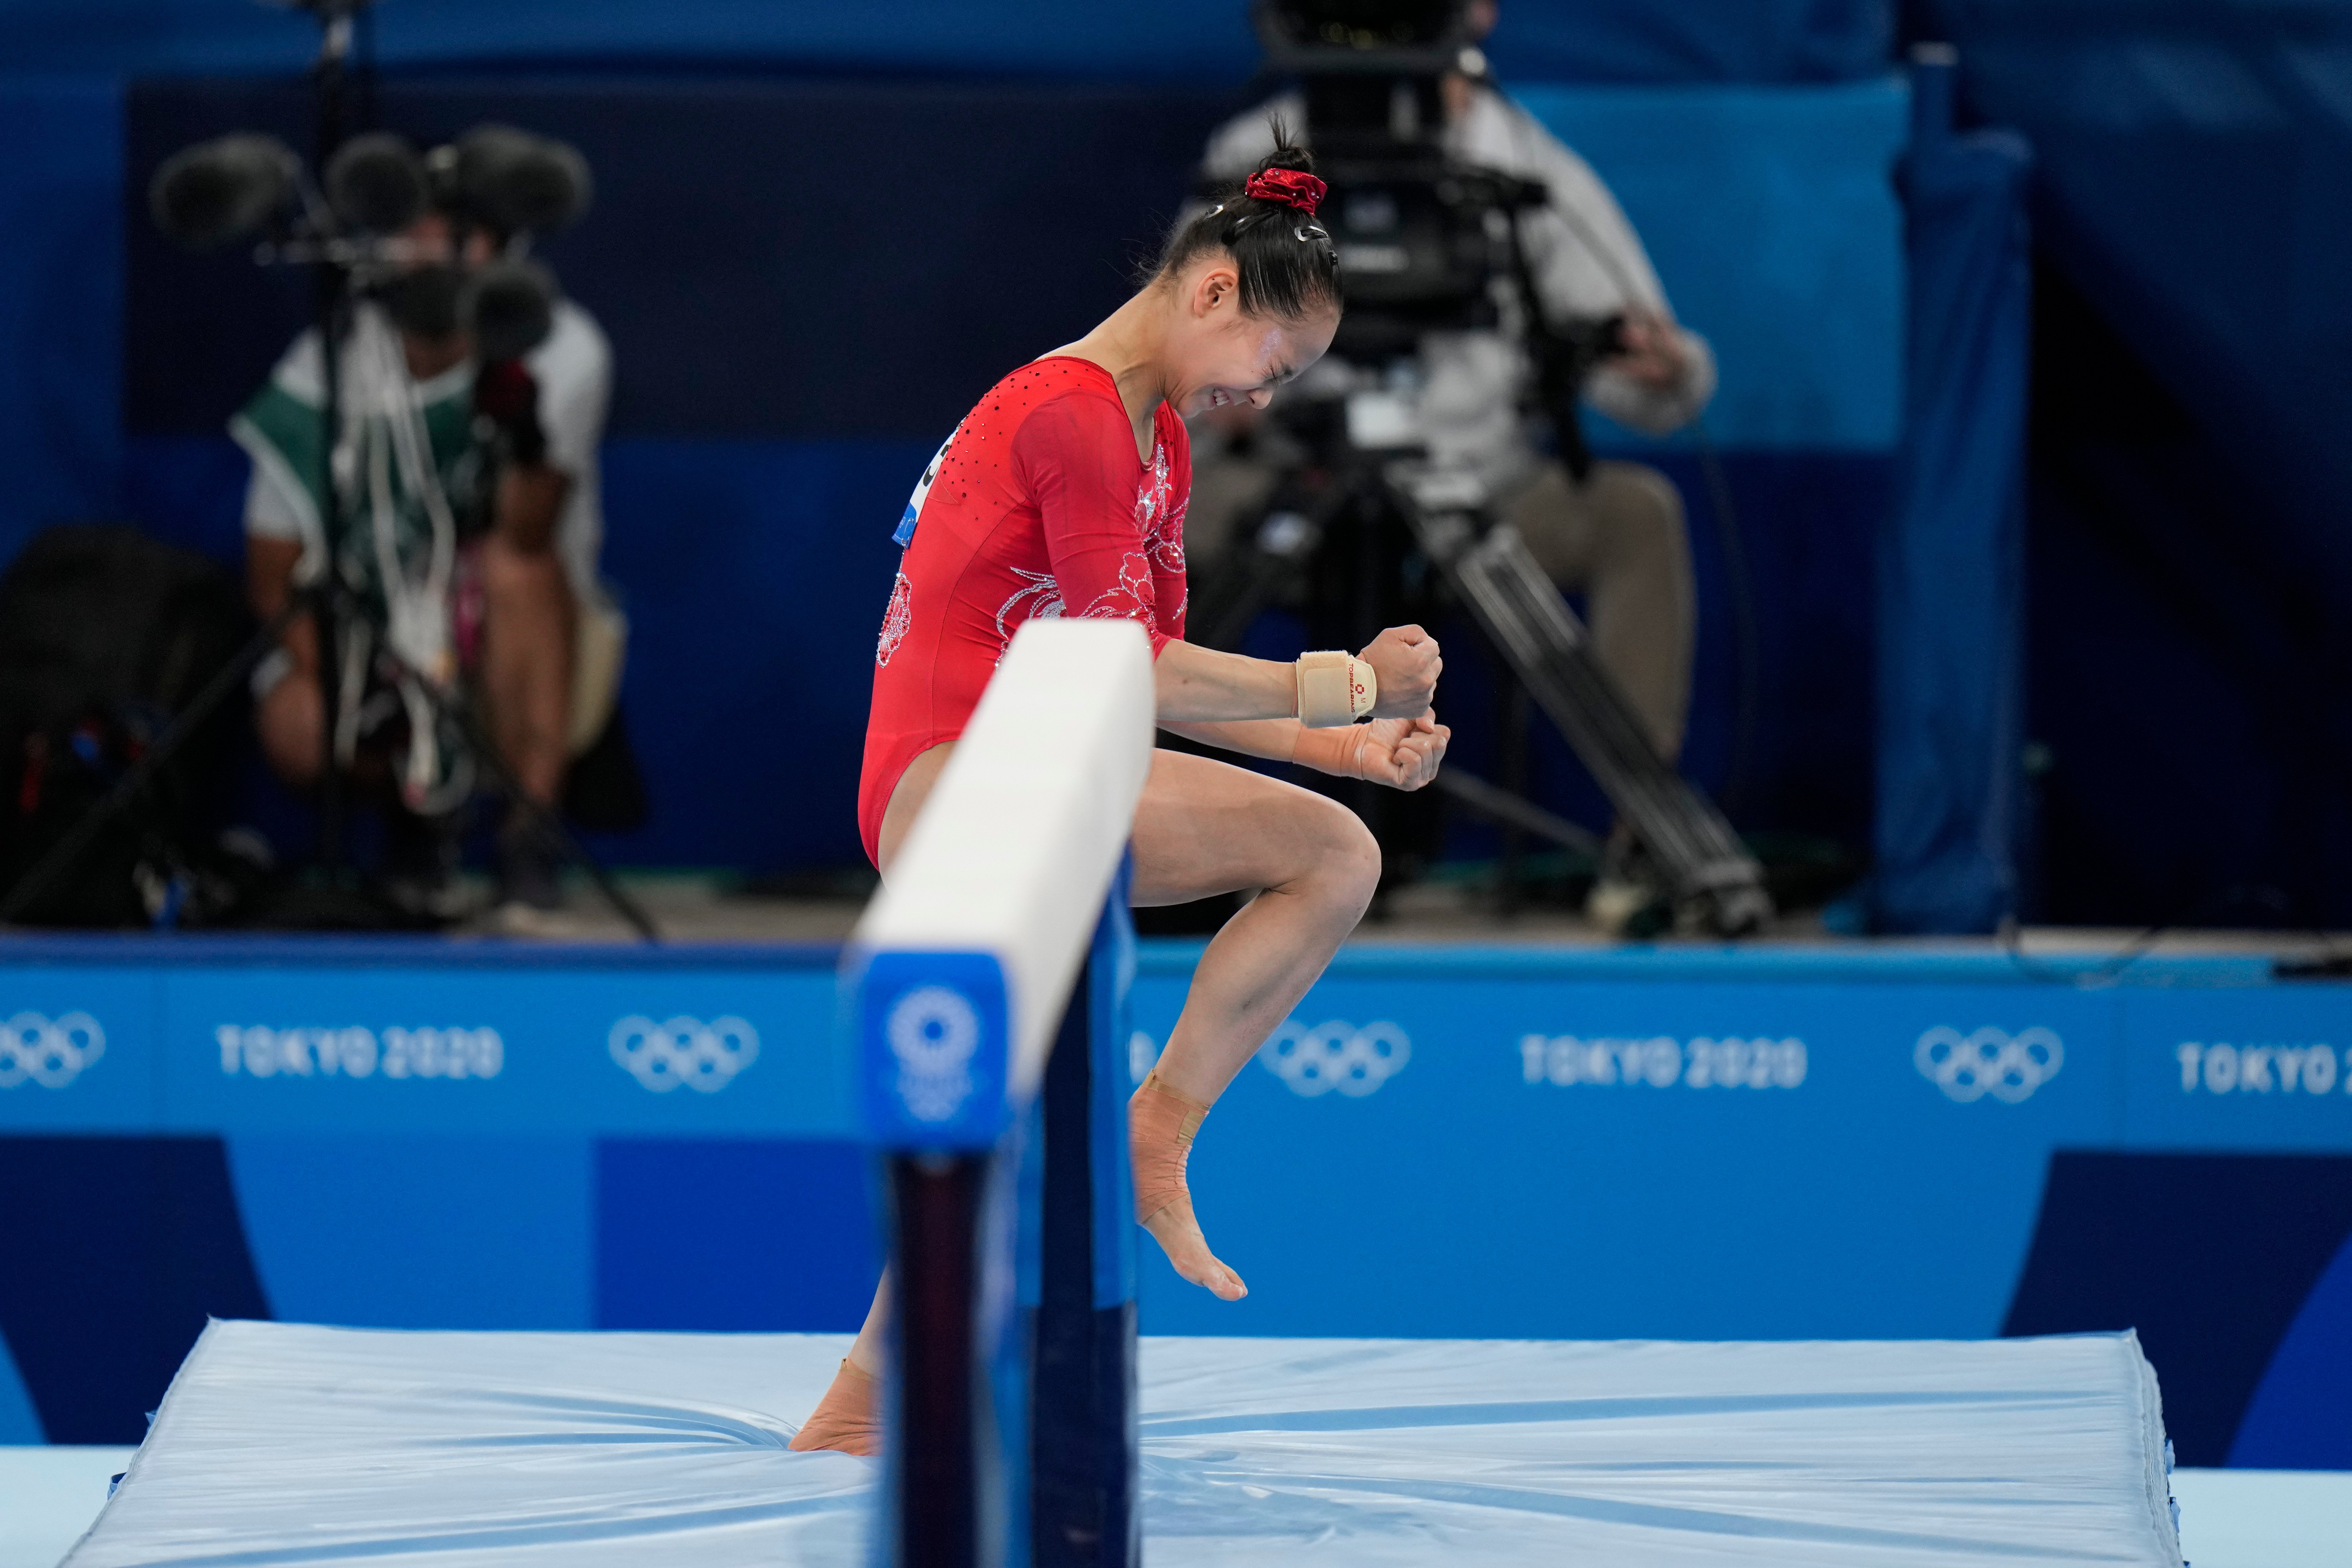 The Best Gymnastics Photo From the Tokyo Olympics